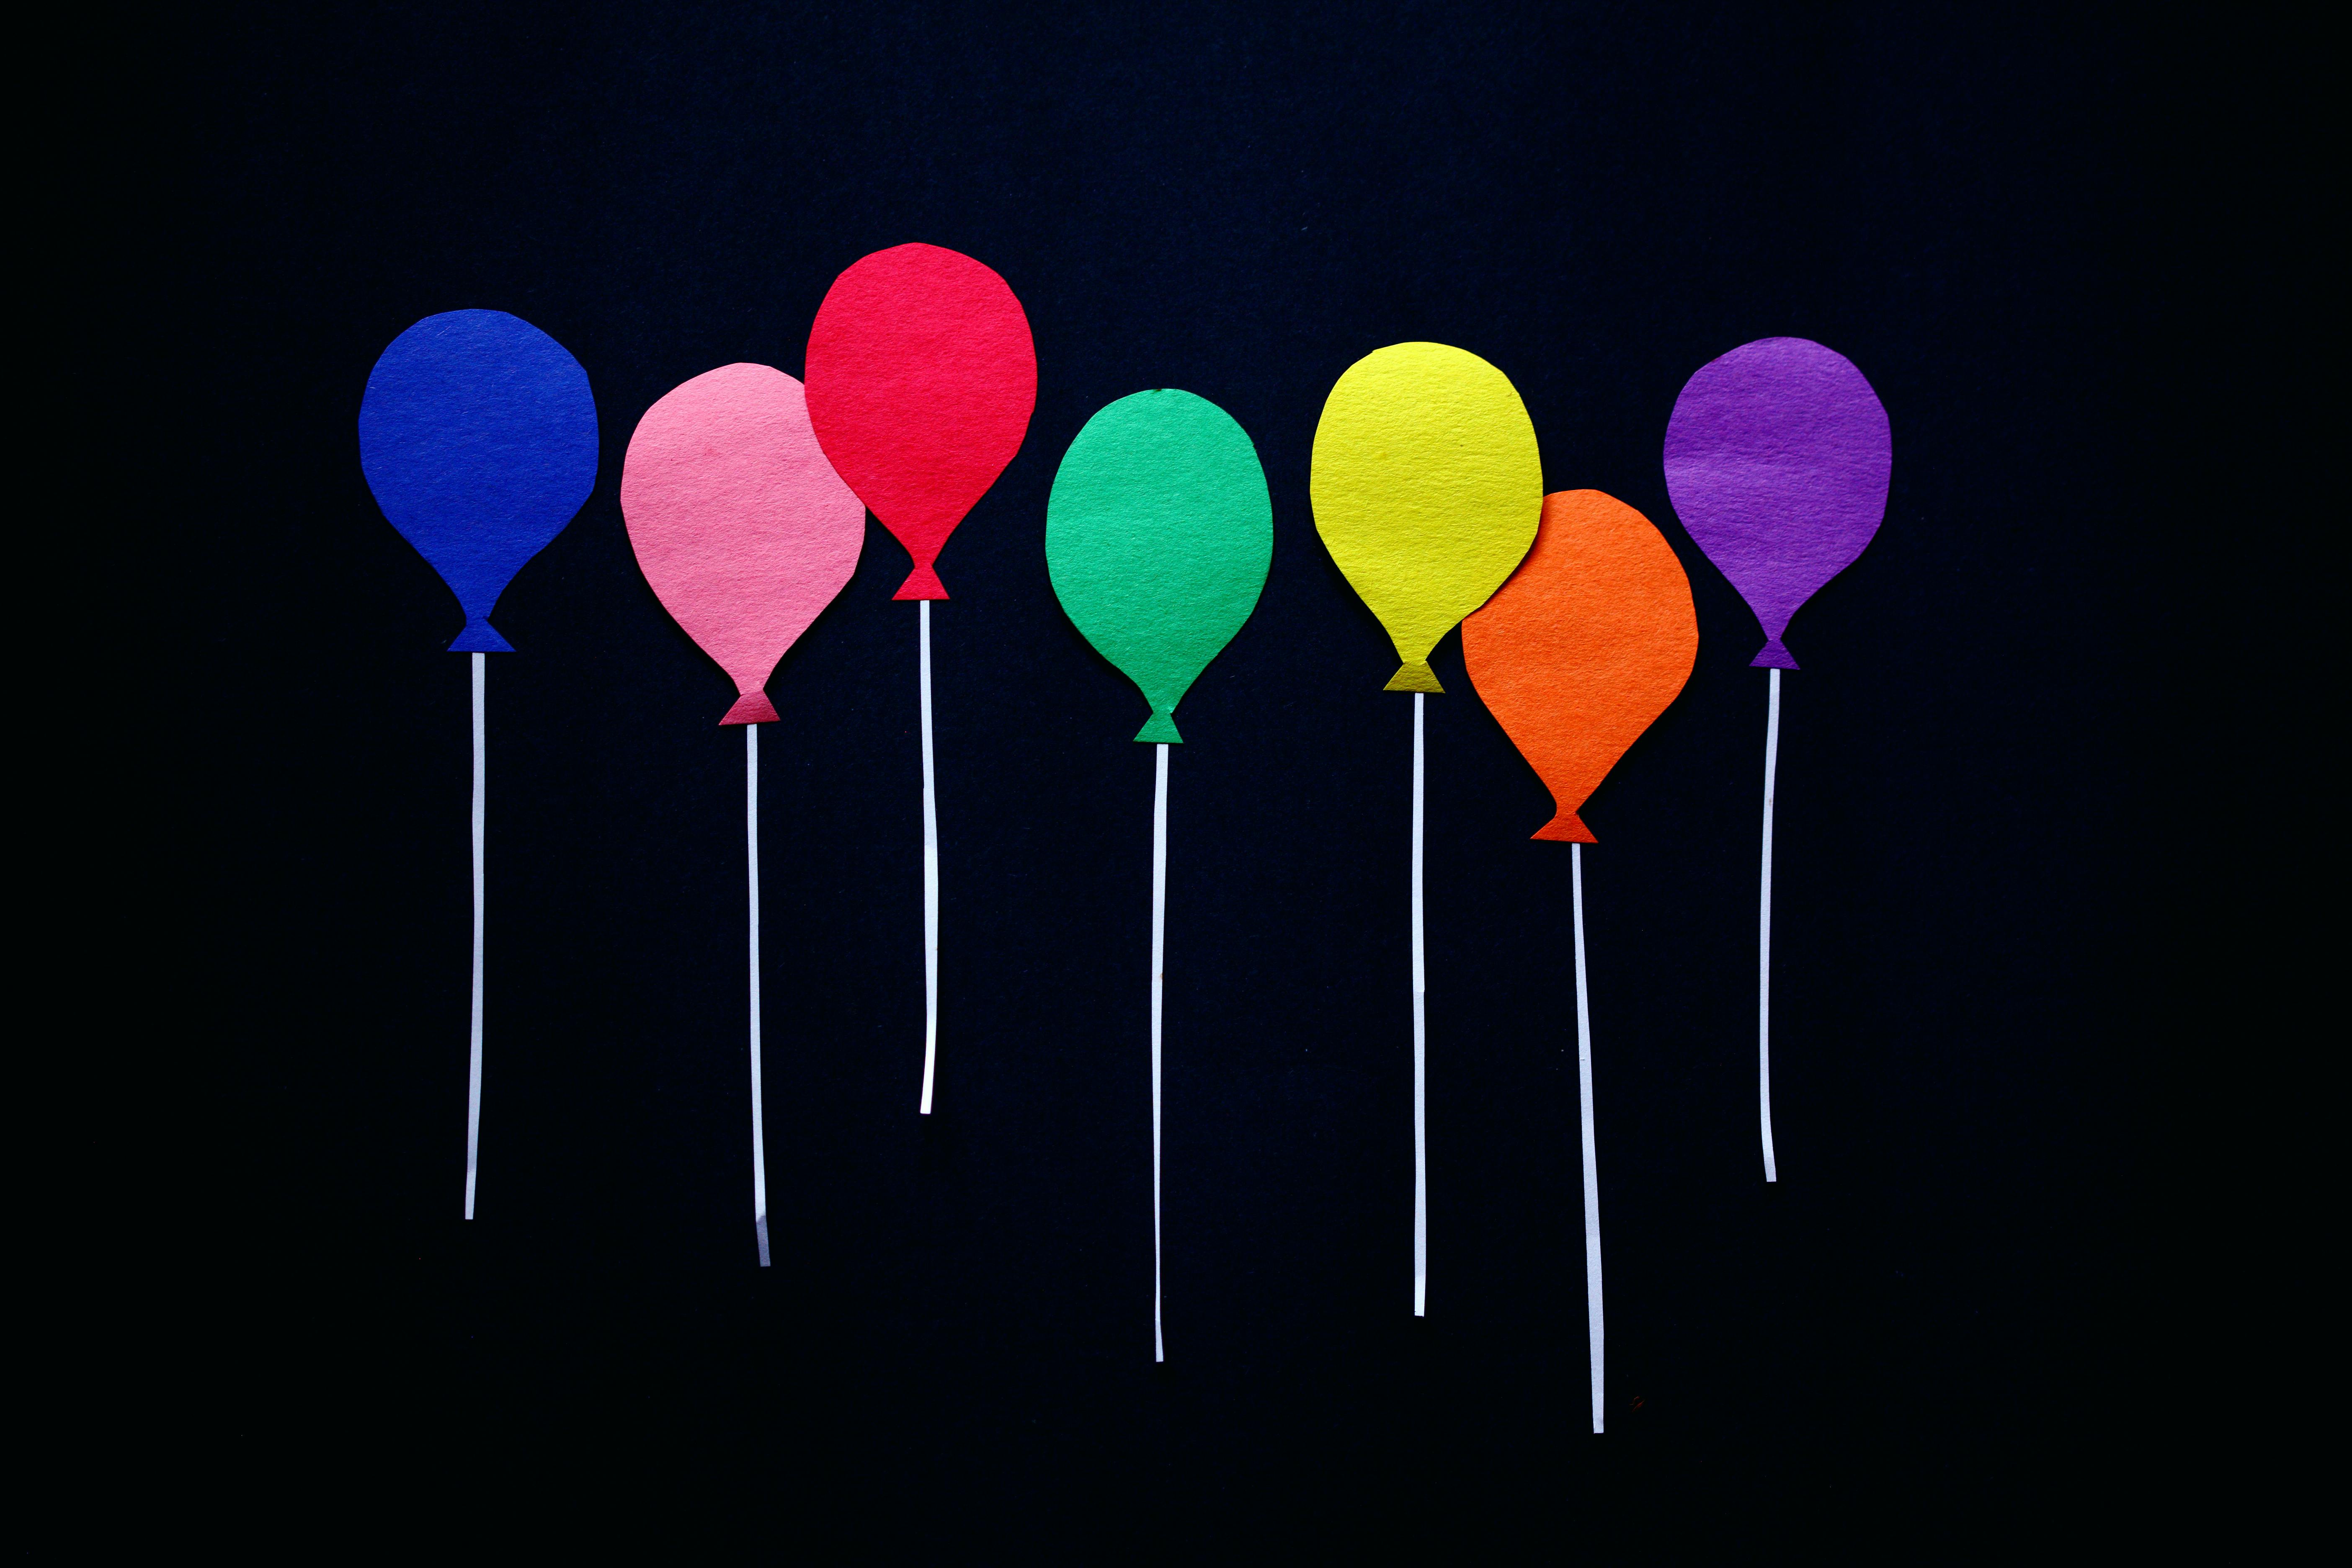 Colorful Cutout Balloons on Black Background · Free Stock Photo